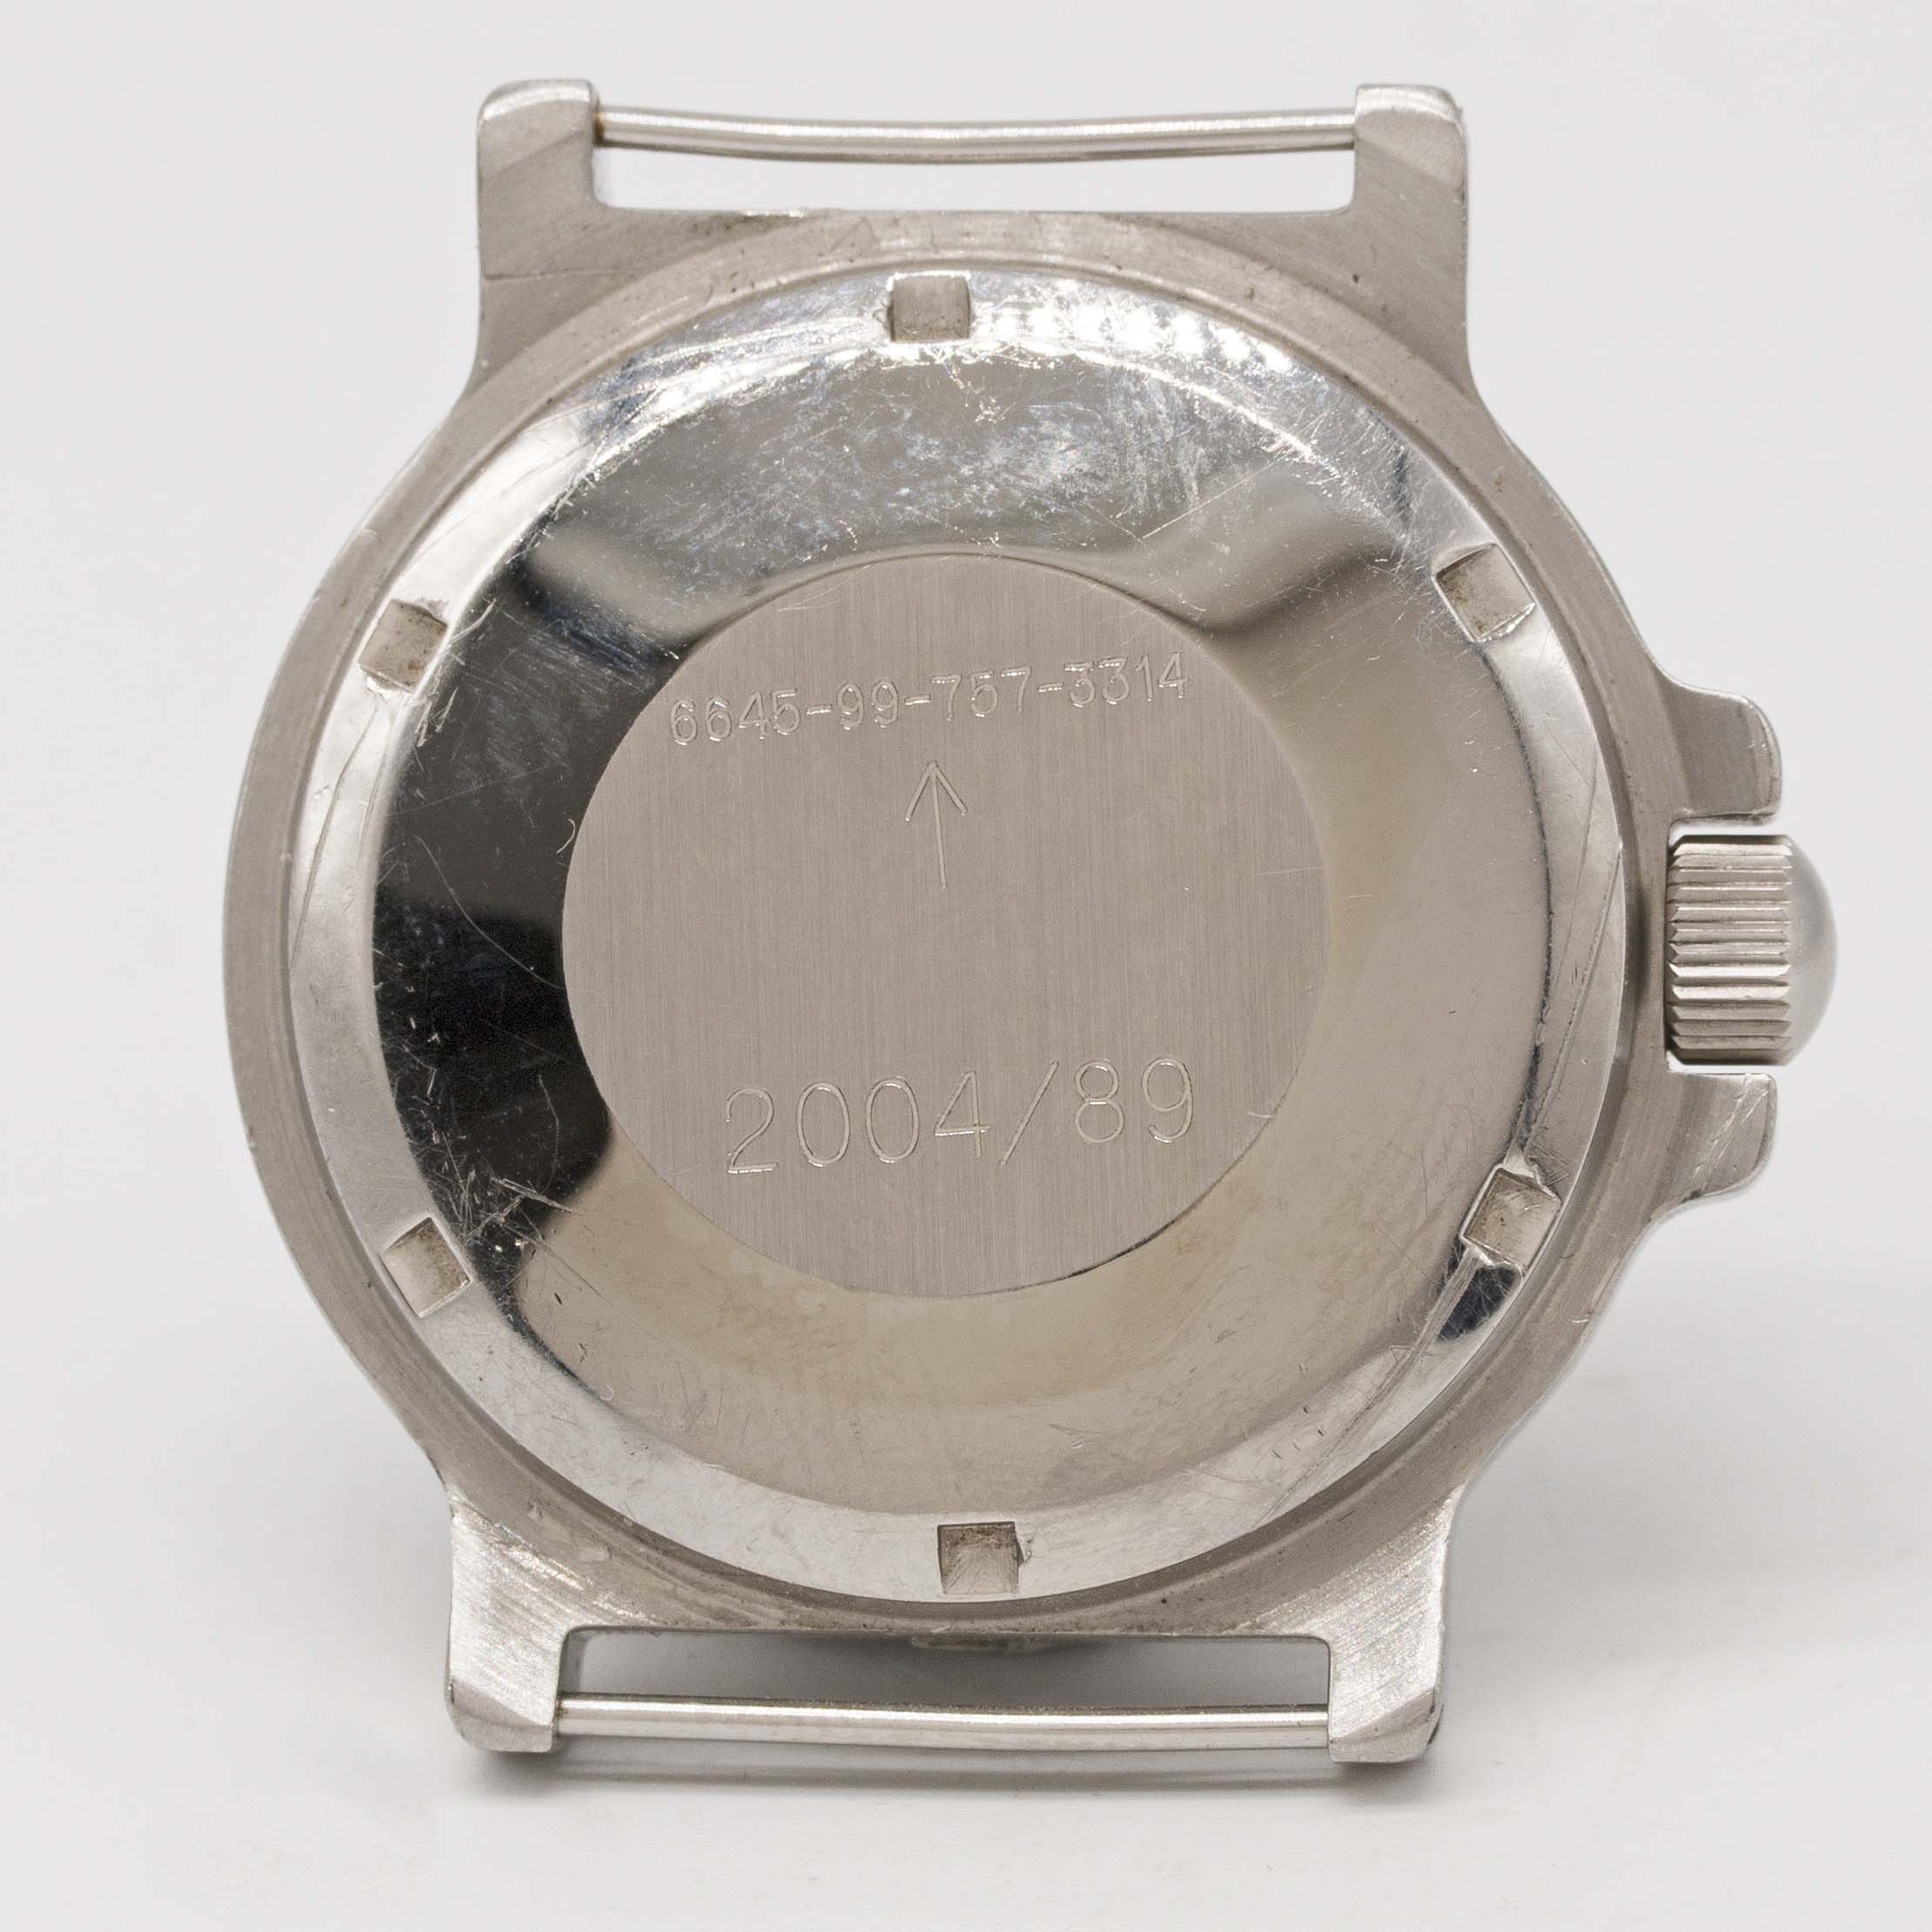 A GENTLEMAN'S STAINLESS STEEL BRITISH MILITARY PRECISTA ROYAL NAVY DIVERS WRIST WATCH DATED 1989 - Image 3 of 4